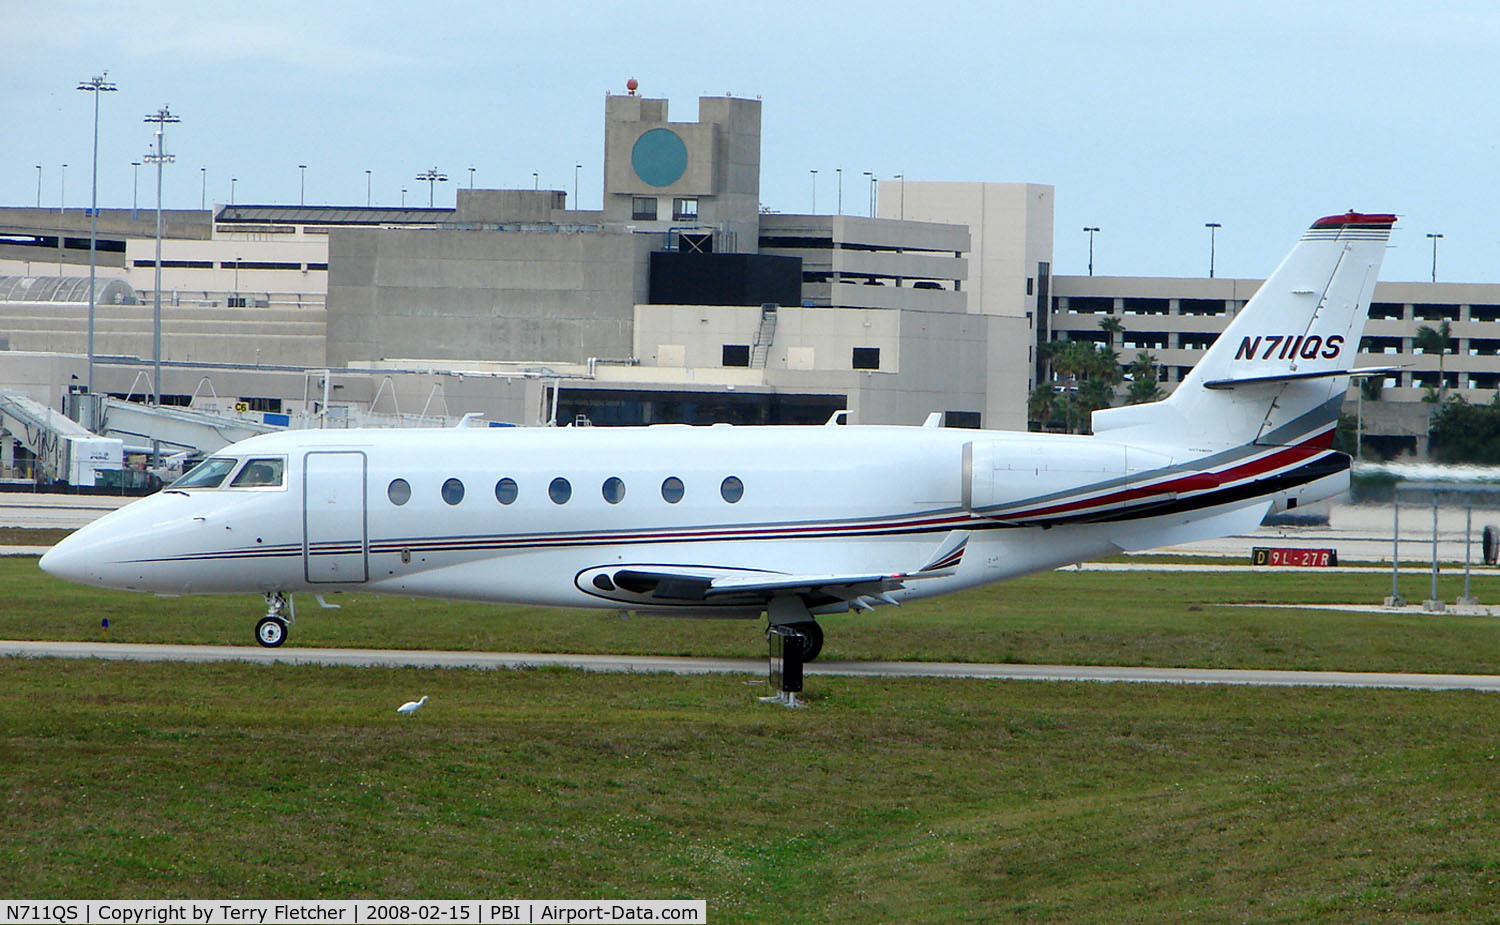 N711QS, 2006 Israel Aircraft Industries Gulfstream 200 C/N 129, The business aircraft traffic at West Palm Beach on the Friday before President's Day always provides the aviation enthusiast / photographer with a treat